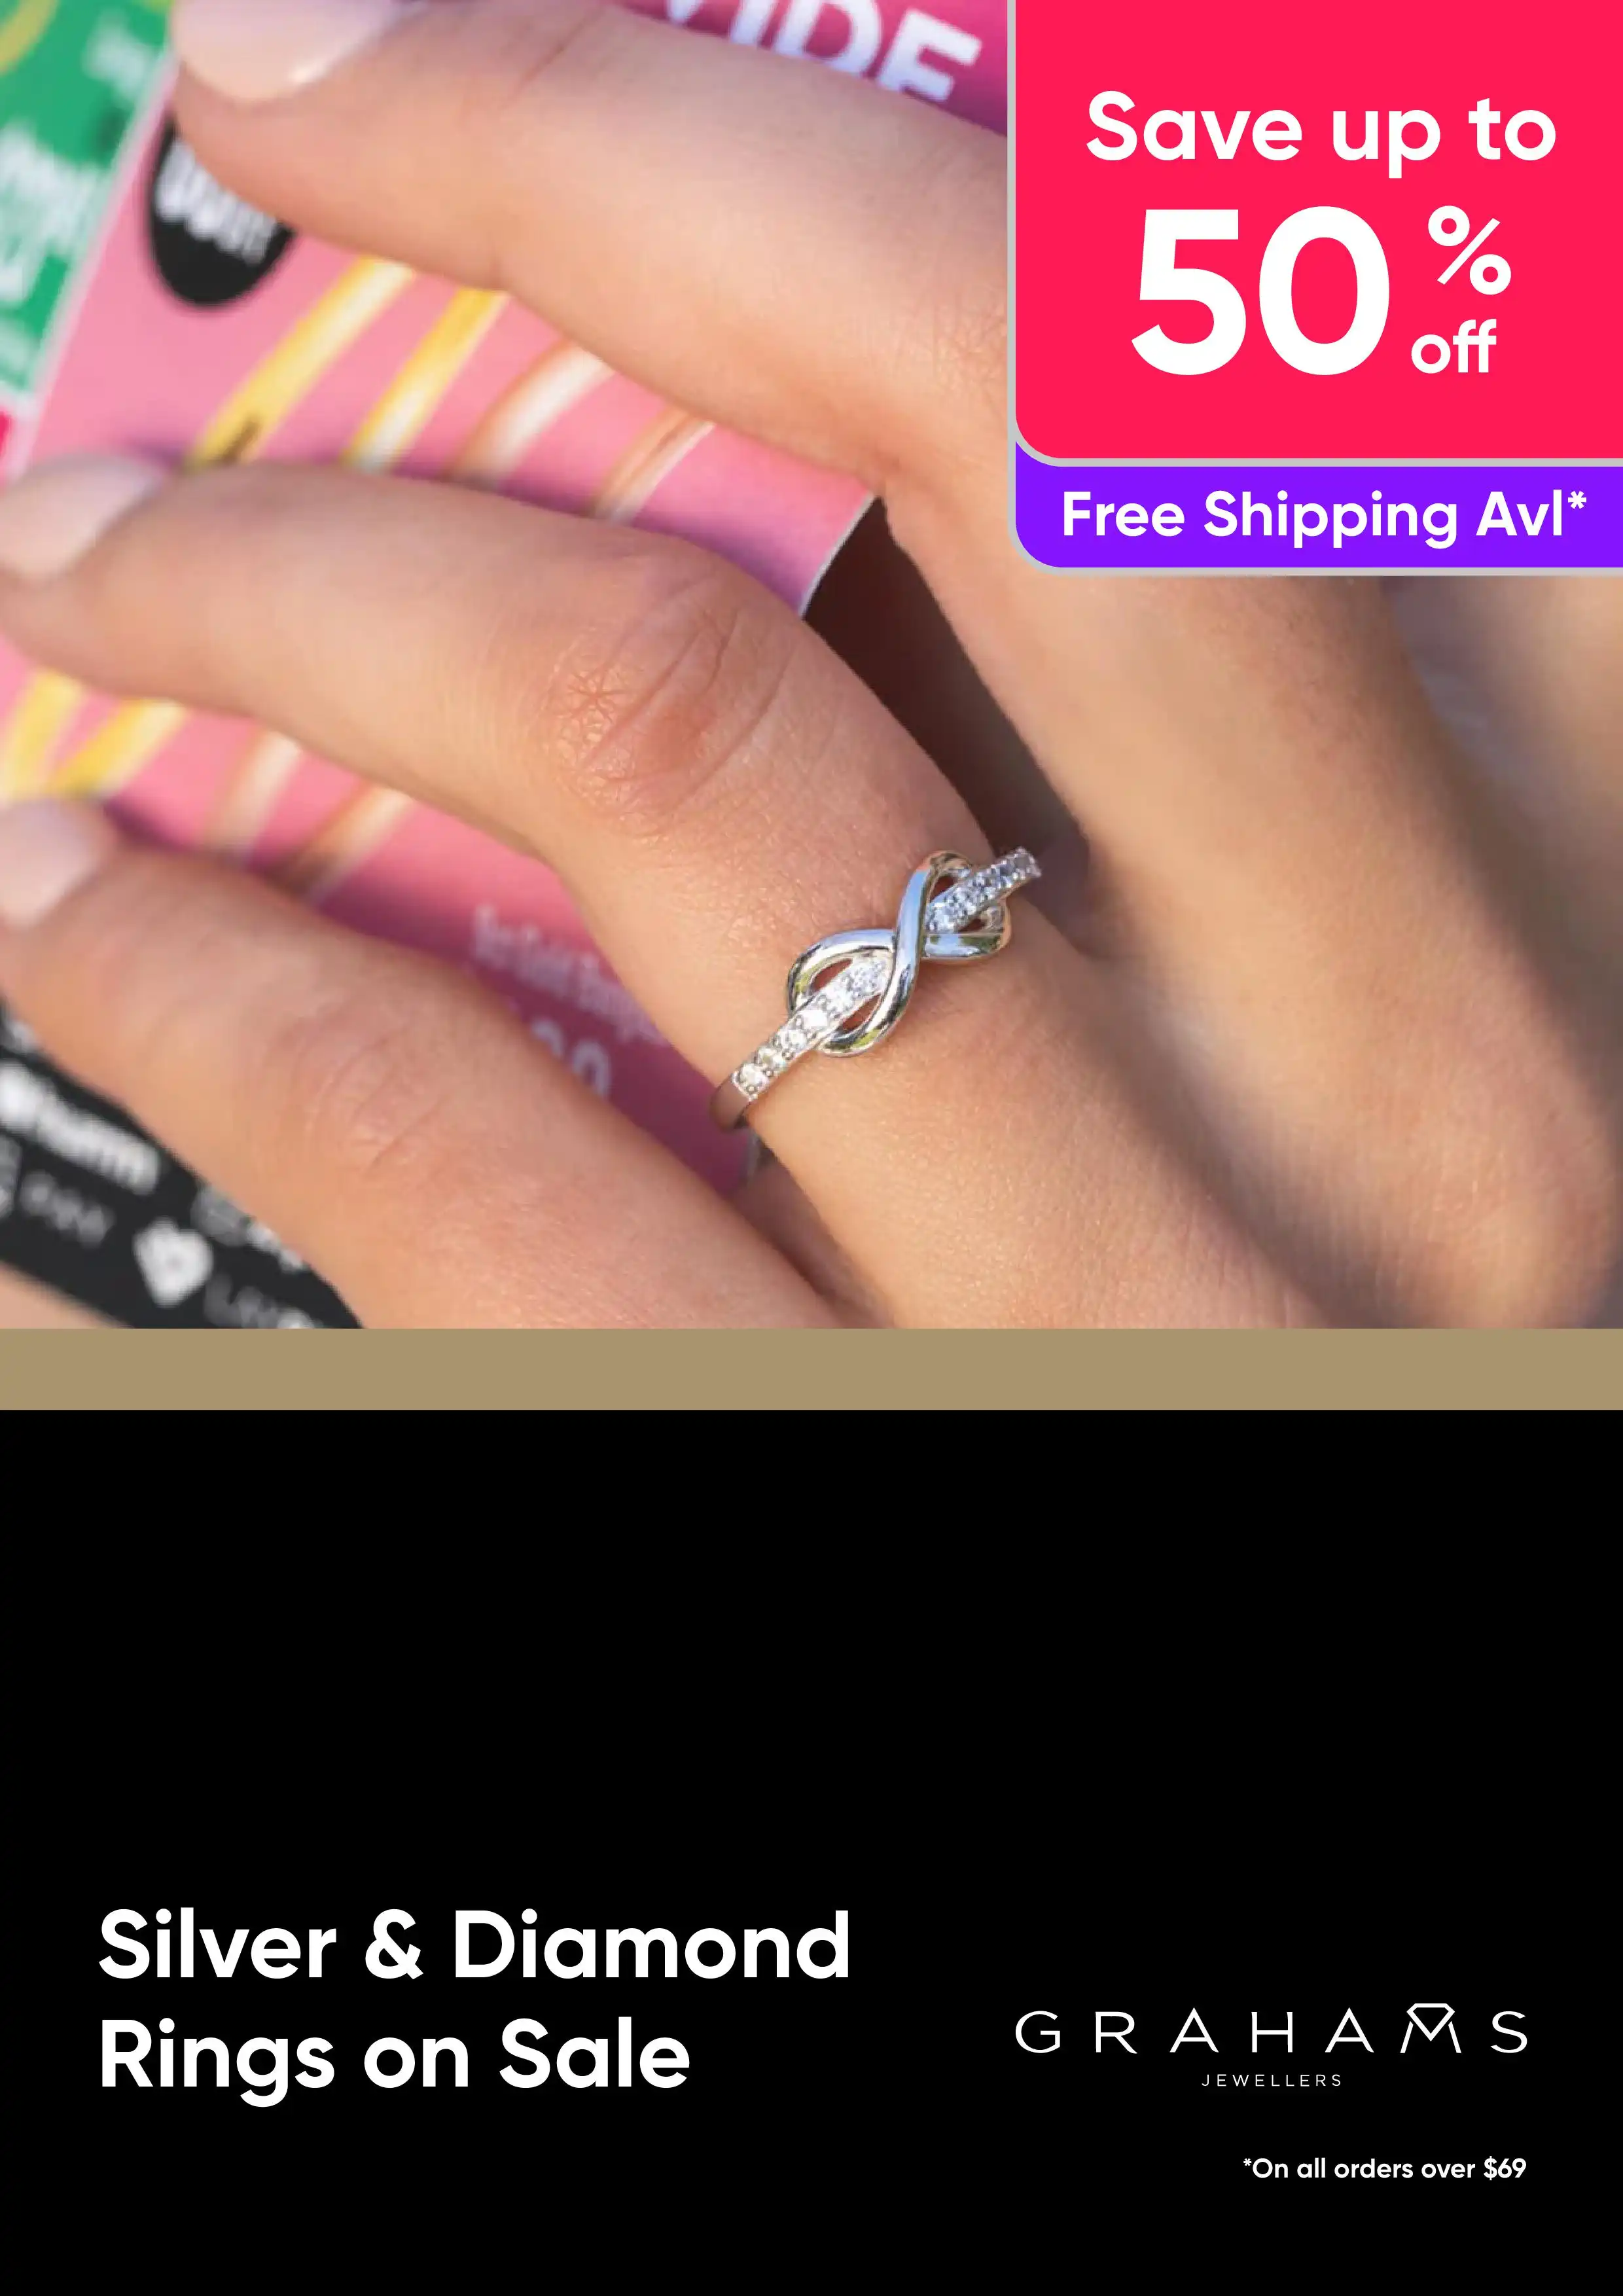 Silver and Diamond Rings on Sale - Save Up to 50% Off